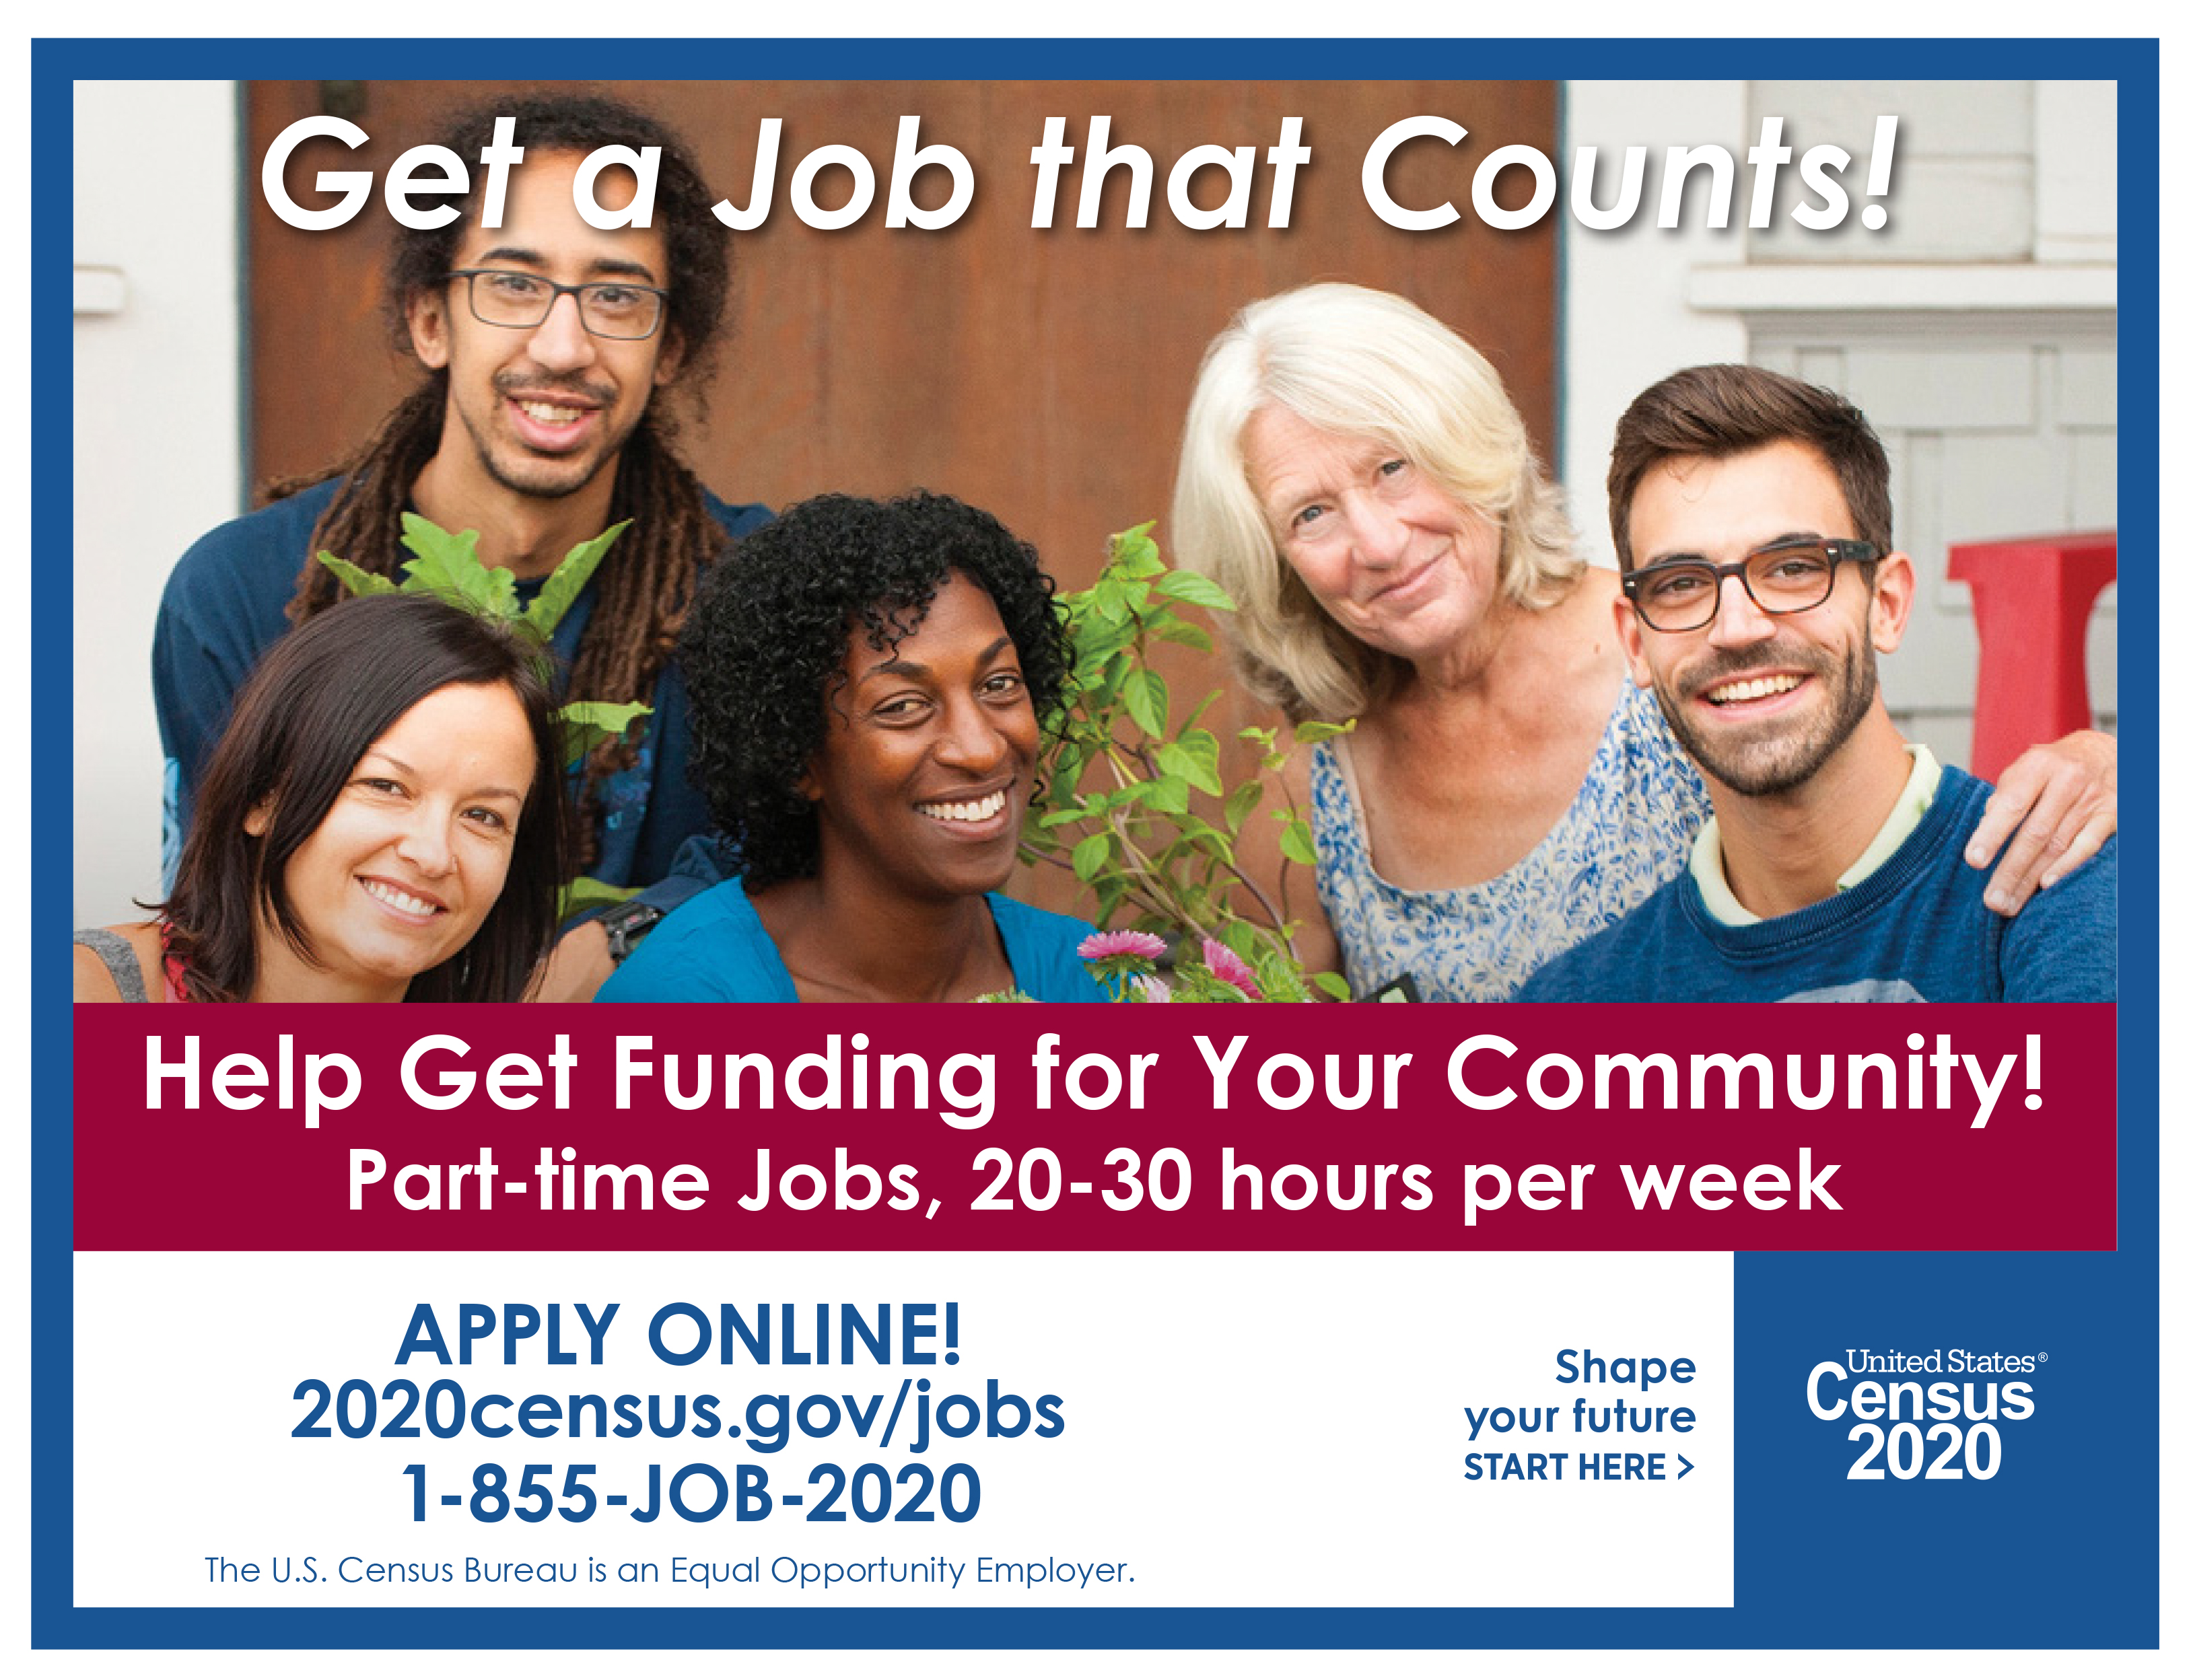 Apply to serve the 2020 census. Positions open Now!